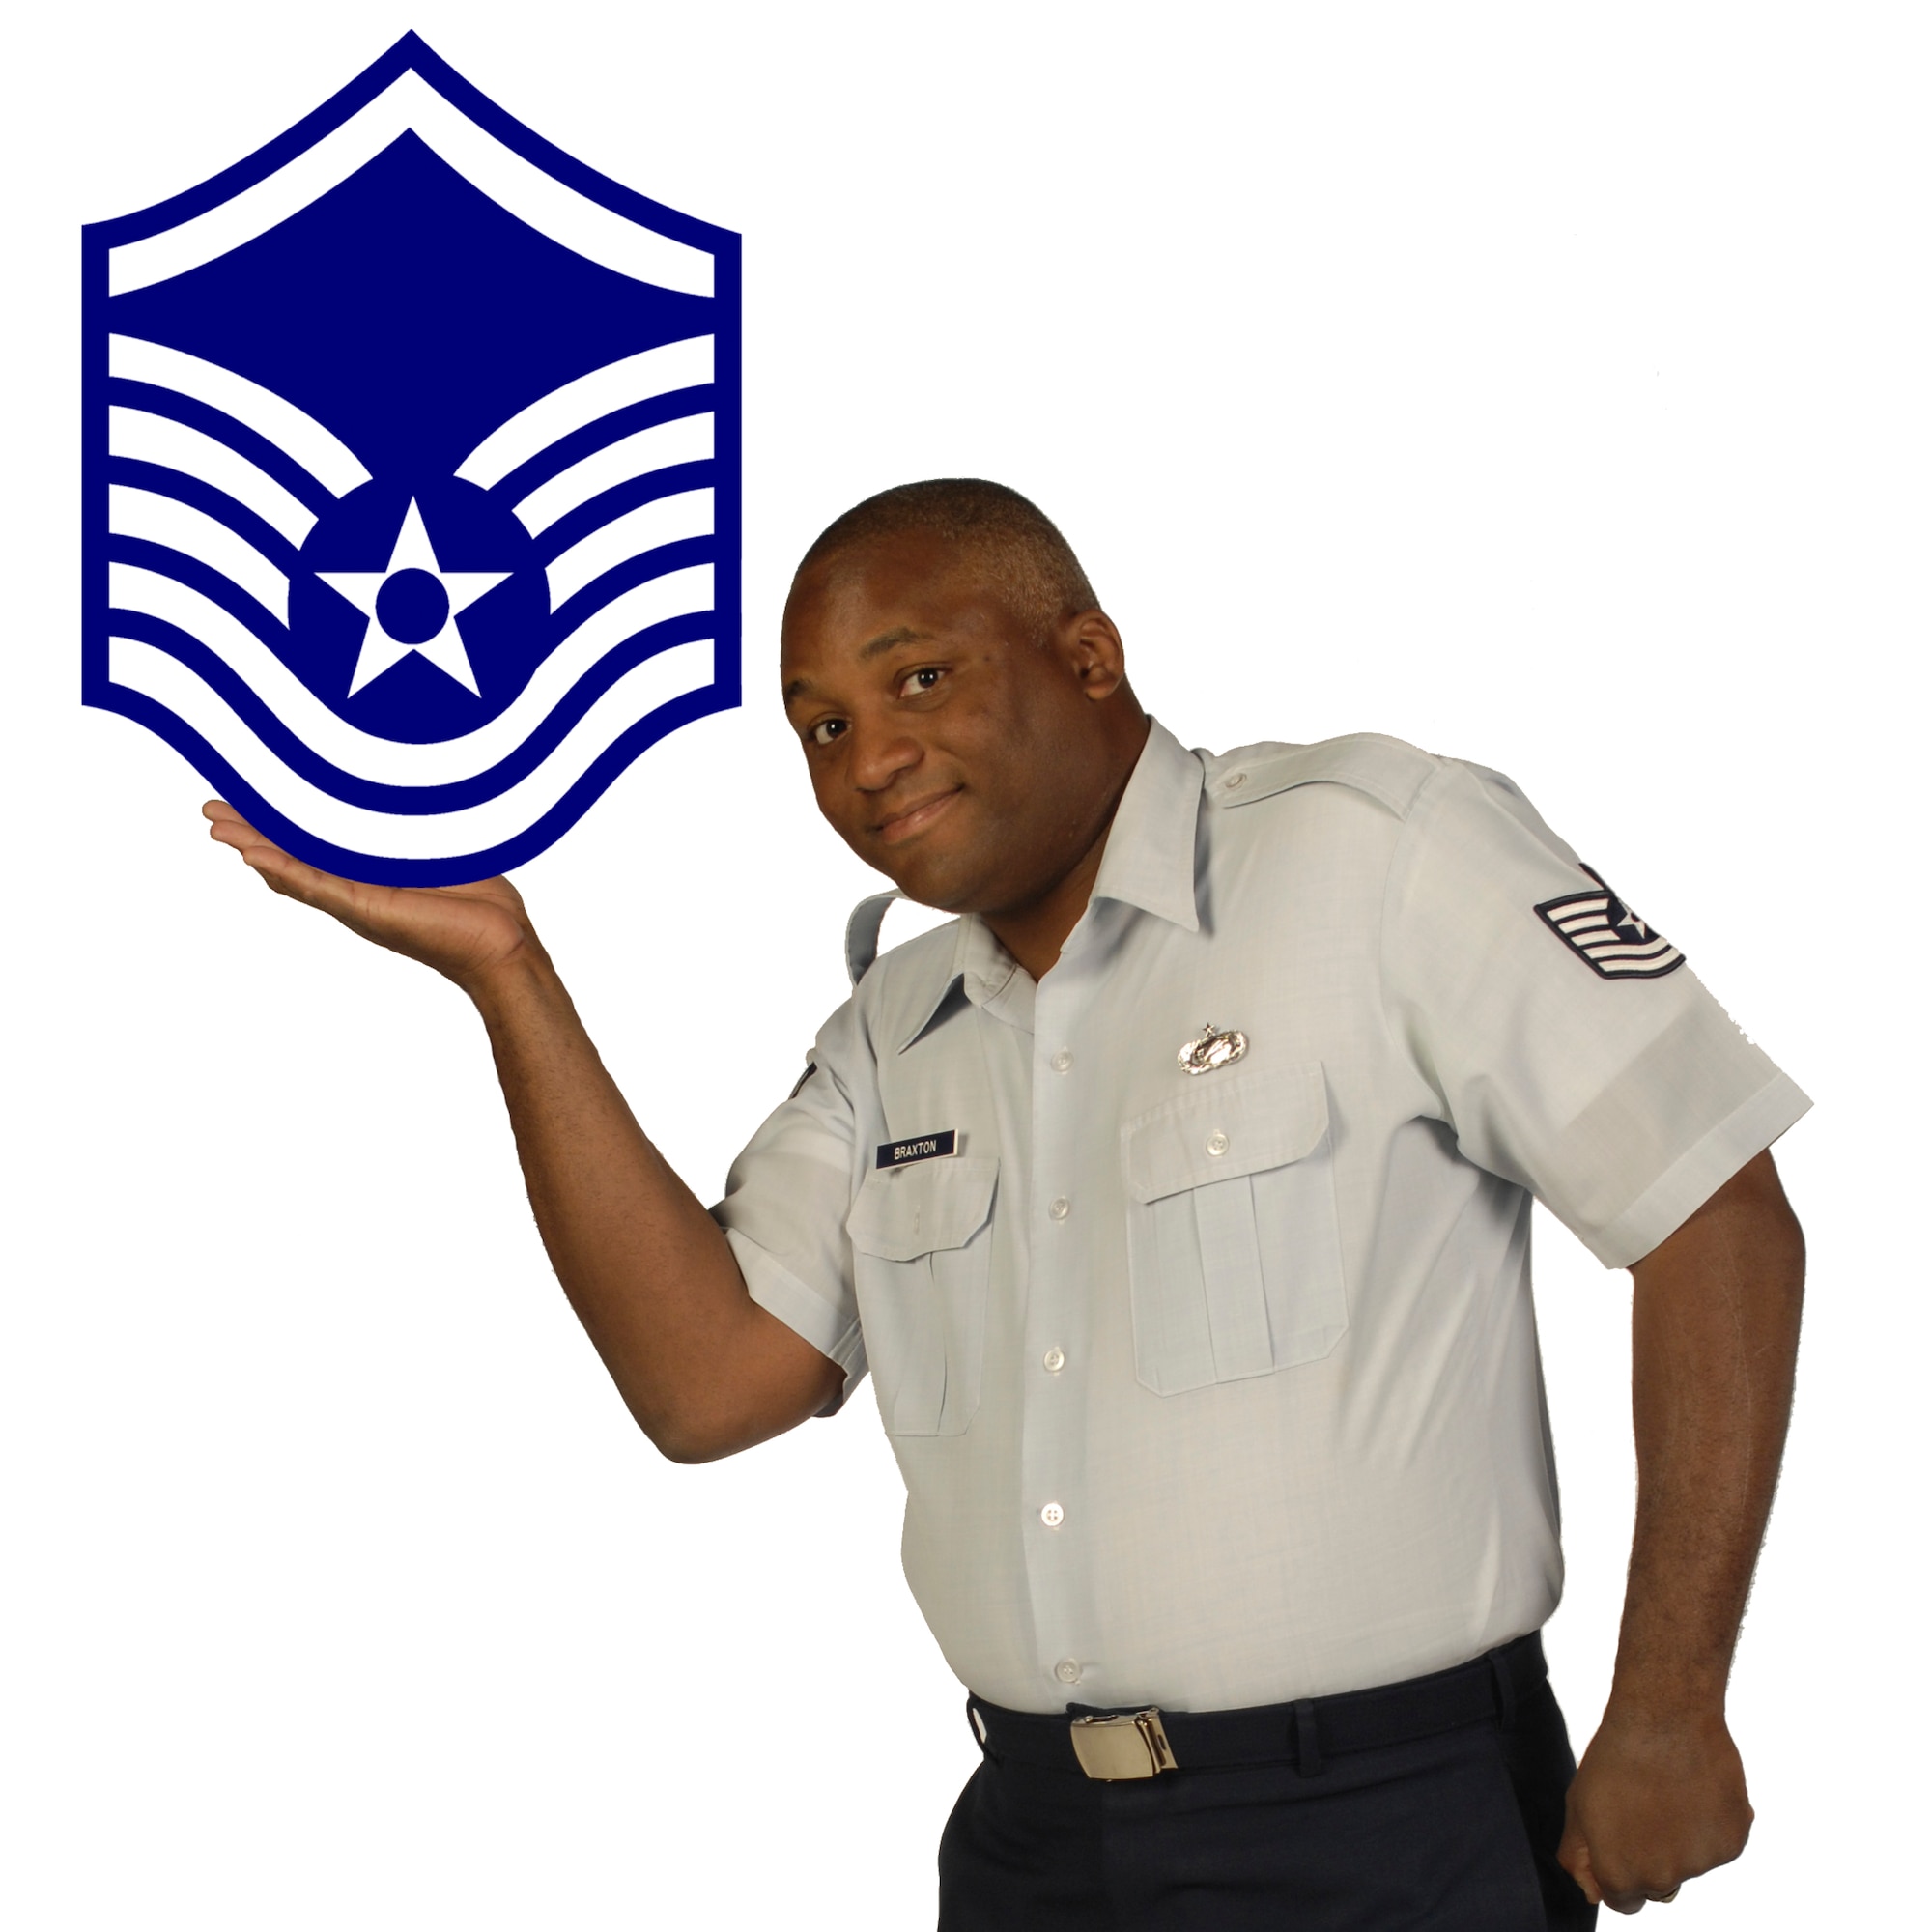 VANDENBERG AIR FORCE BASE, Calif. --  Tech. Sgt. Steven Braxton, 30th Space Communications Squadron, was recently selected for promotion to master sergeant. (U.S. Air Force photo illustration/Airman 1st Class Jonathan Olds)